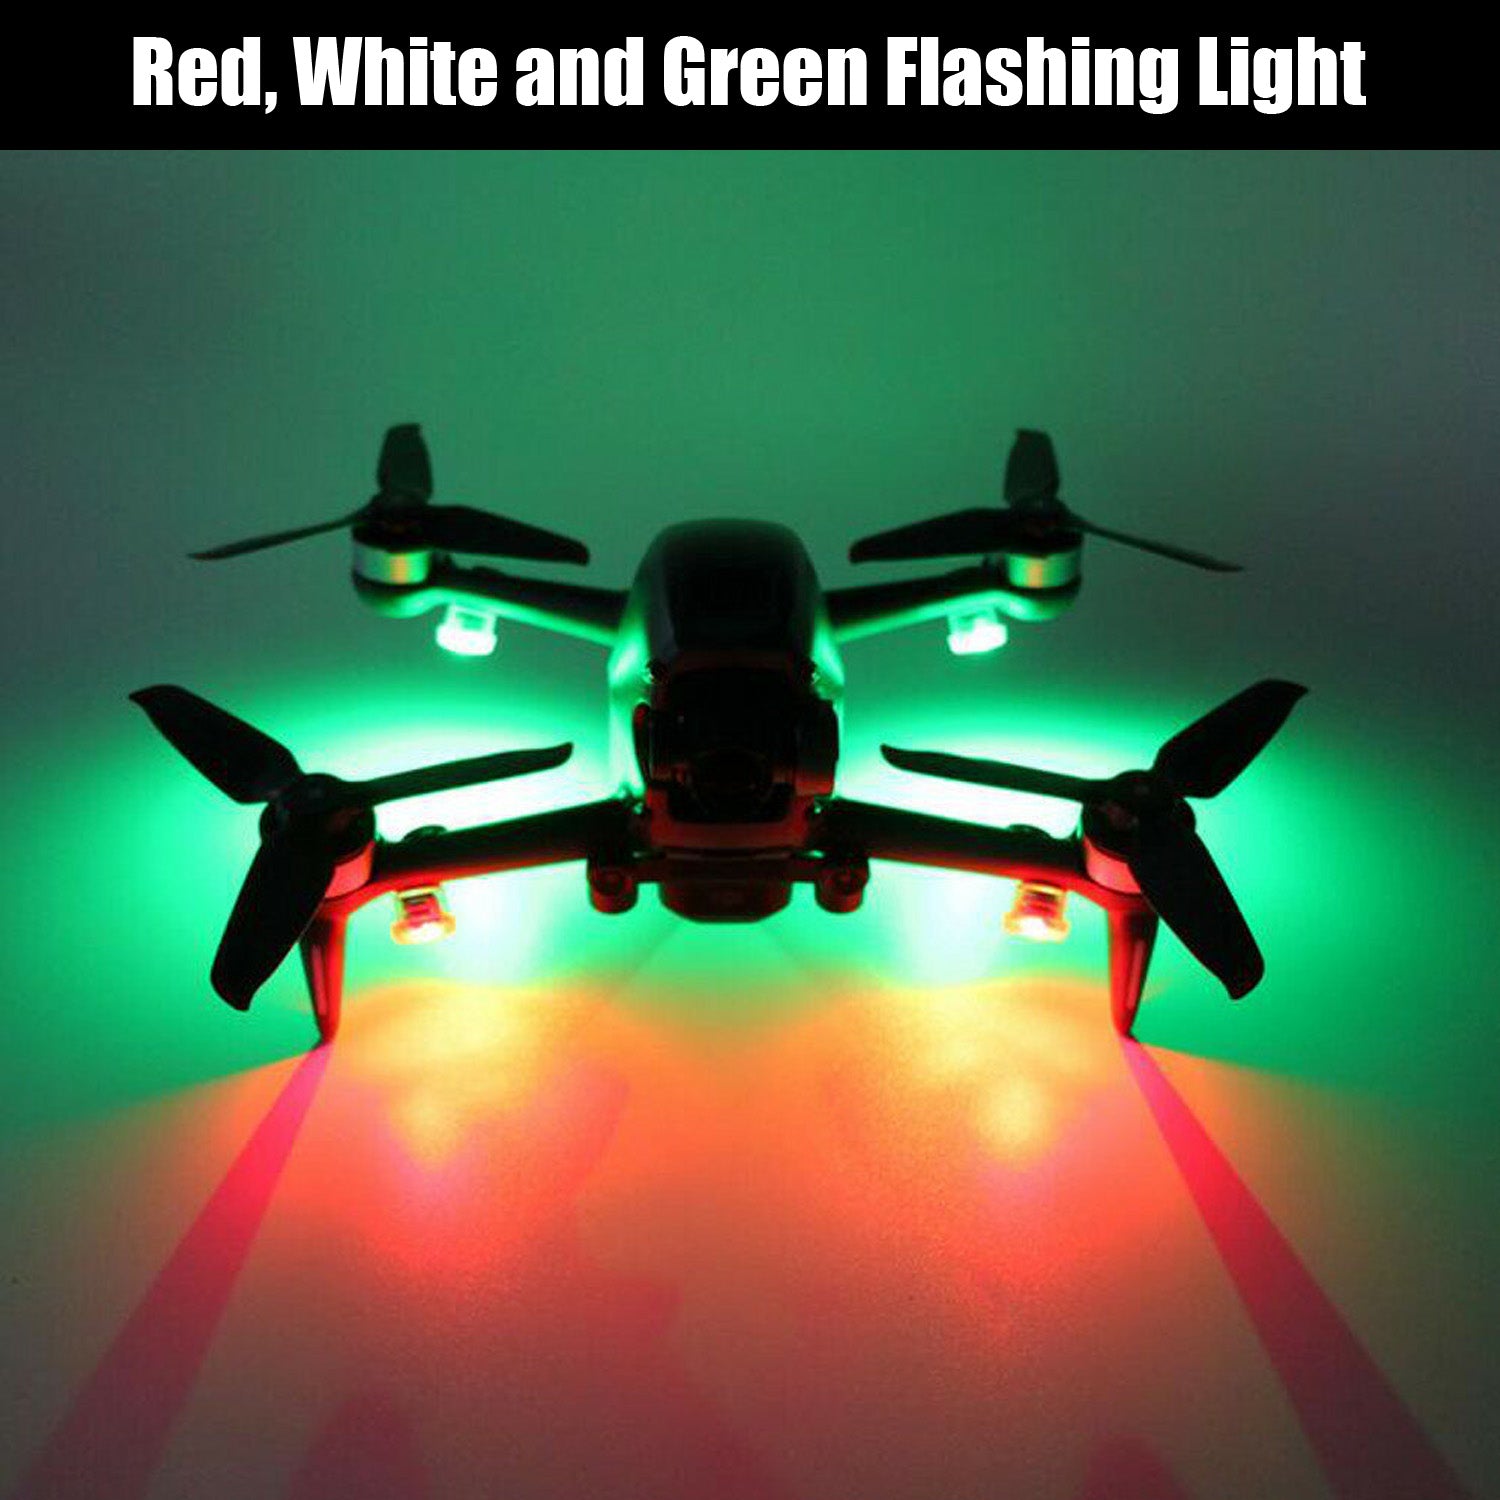 AUTOPOWERZ® Multicolor Colors LED Aircraft Strobe Exterior Lights Kit For Auto Motorbike Drone Bicycle USB Rechargeable Battery(2pcs)